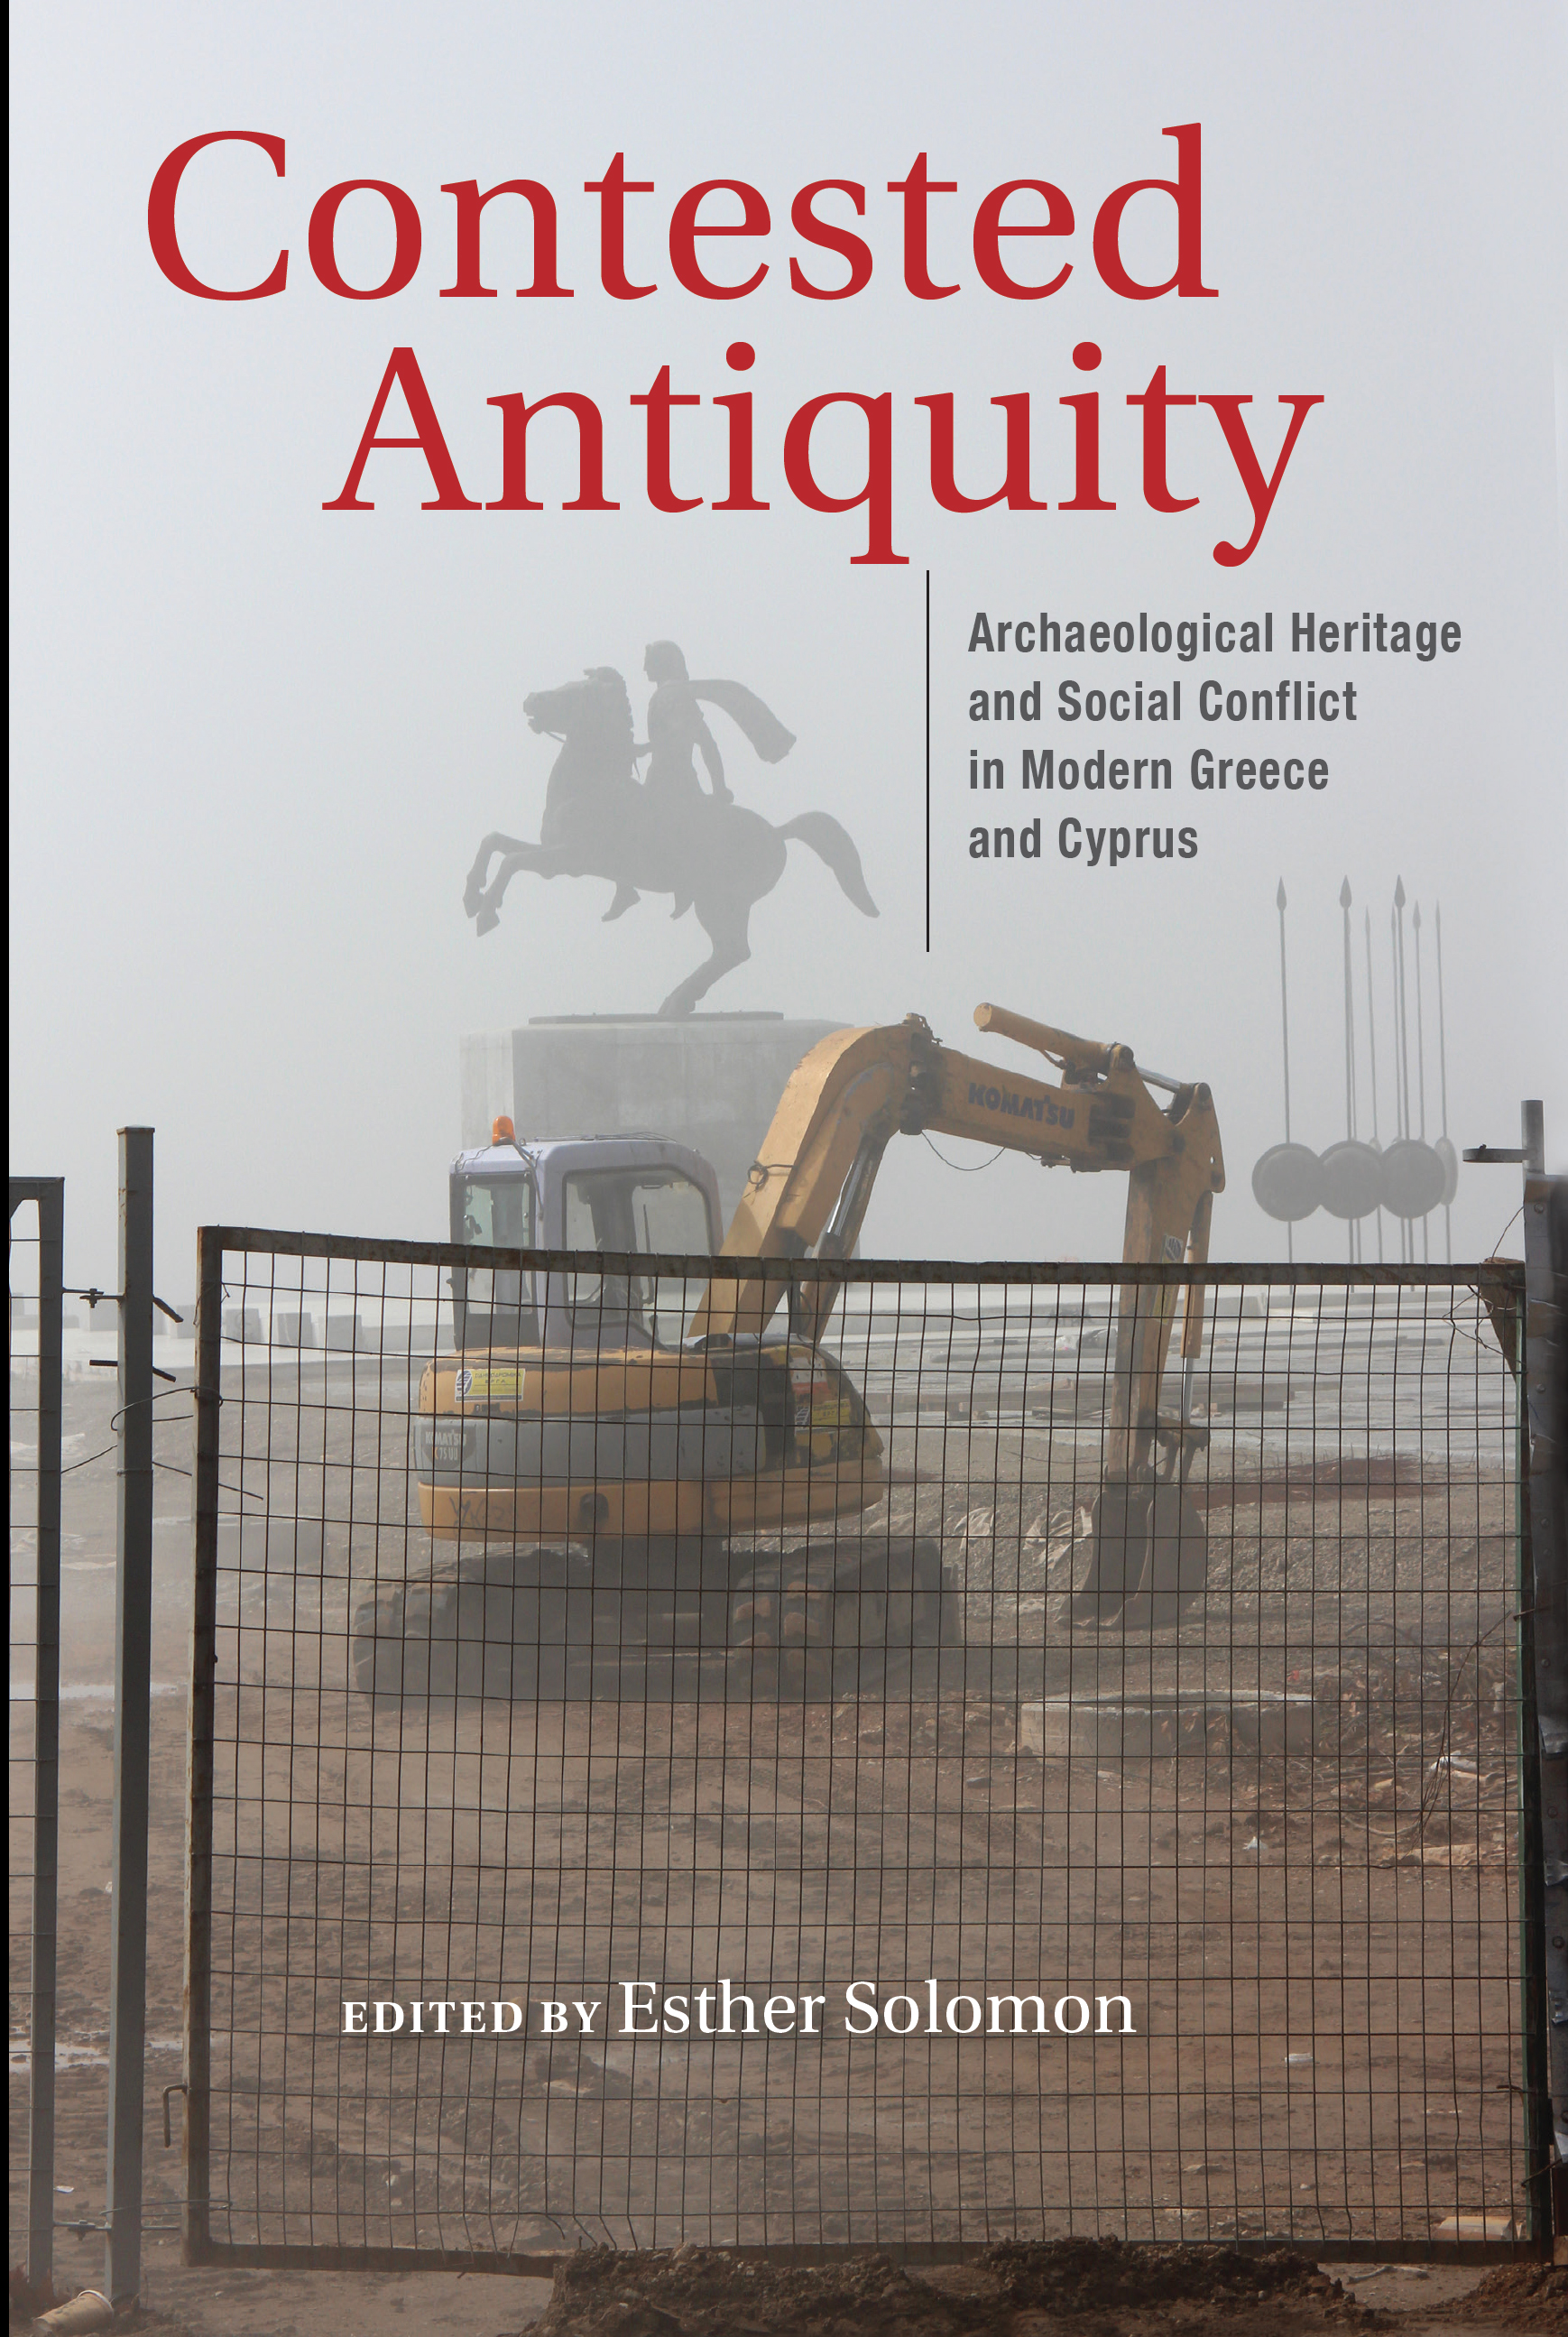 Link to Contested Antiquity edited by Esther Solomon in the Catalog